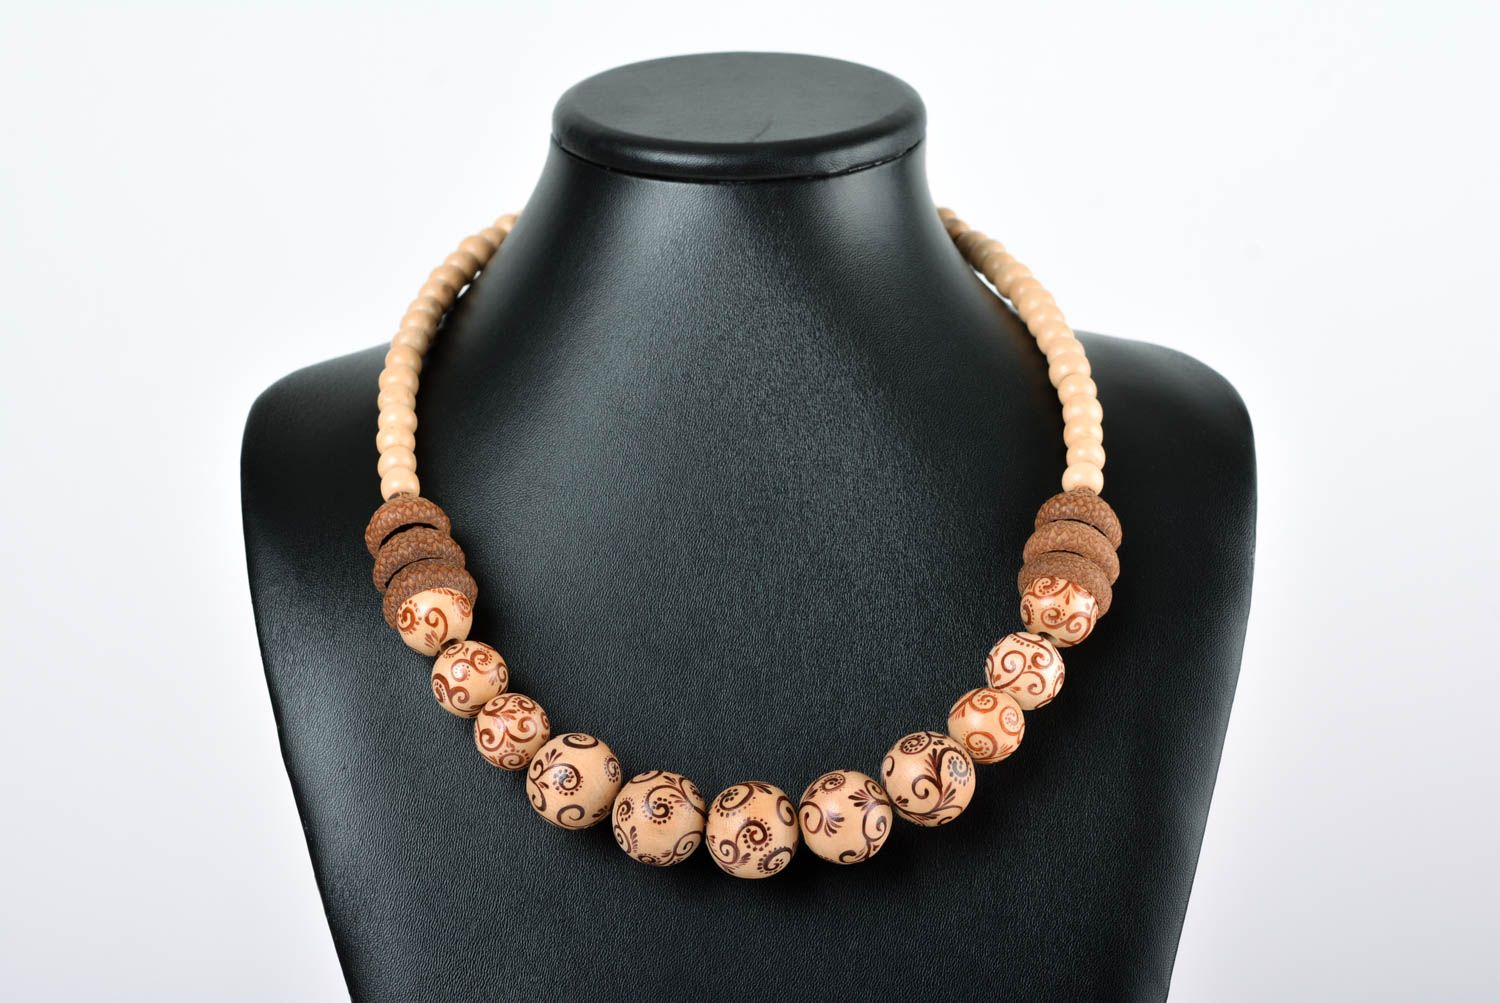 Handmade wooden necklace designer jewelry beaded necklace fashion jewelry photo 2